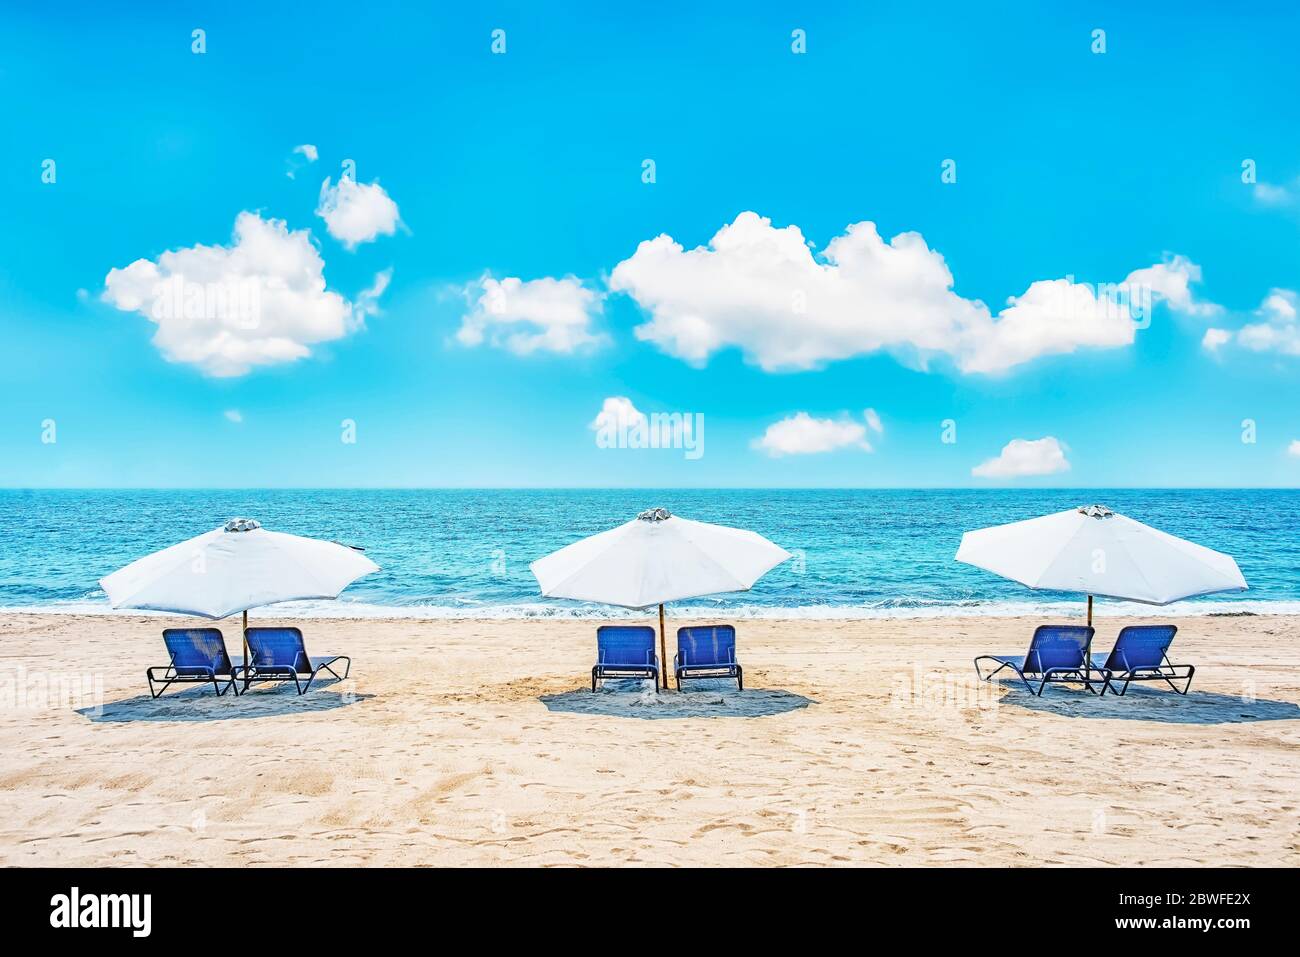 Chairs and umbrellas on a tropical beach Stock Photo